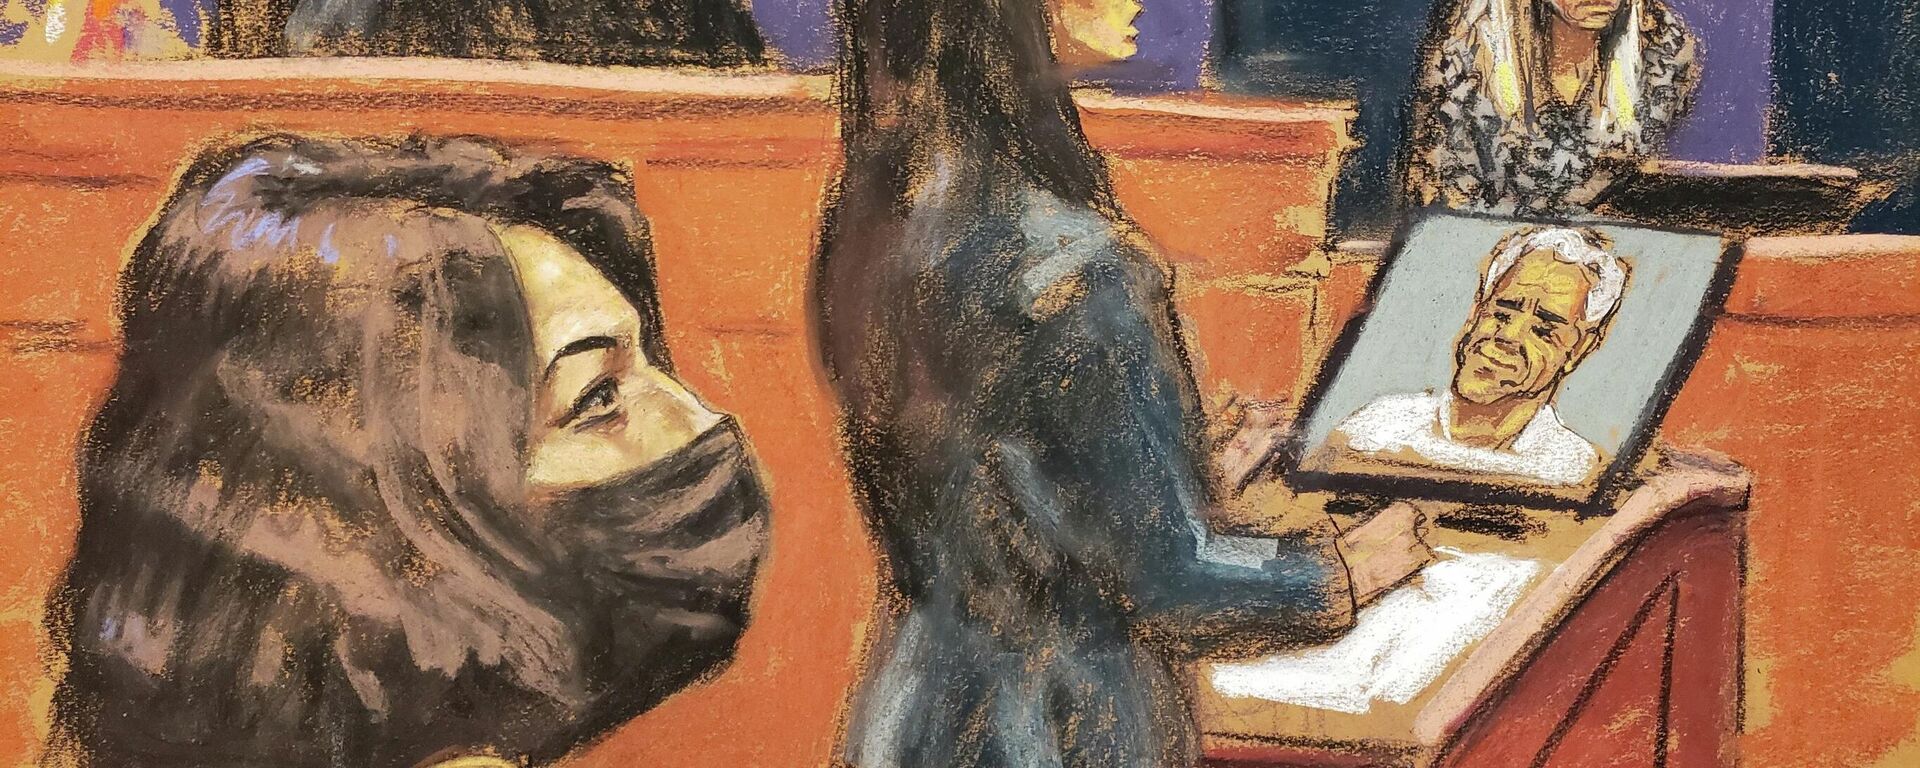 Witness Annie Farmer is questioned by prosecutor Lara Pomerantz during the trial of Ghislaine Maxwell, the Jeffrey Epstein associate accused of sex trafficking, in a courtroom sketch in New York City, U.S., December 10, 2021 - Sputnik International, 1920, 05.01.2022